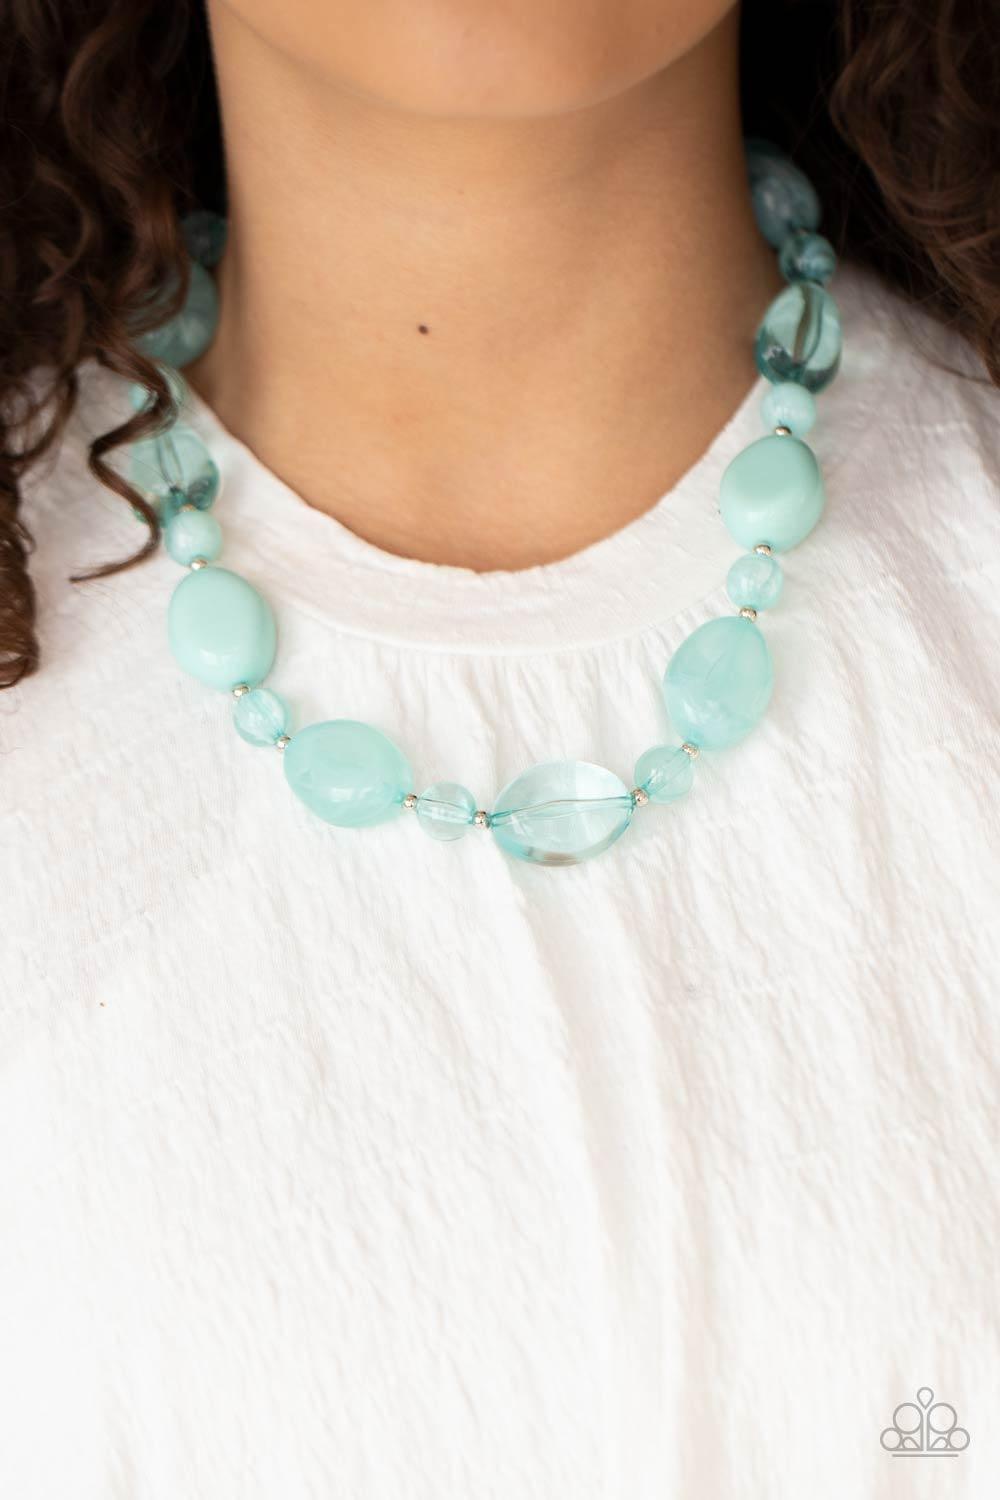 Paparazzi Accessories - Staycation Stunner - Blue Necklace - Bling by JessieK